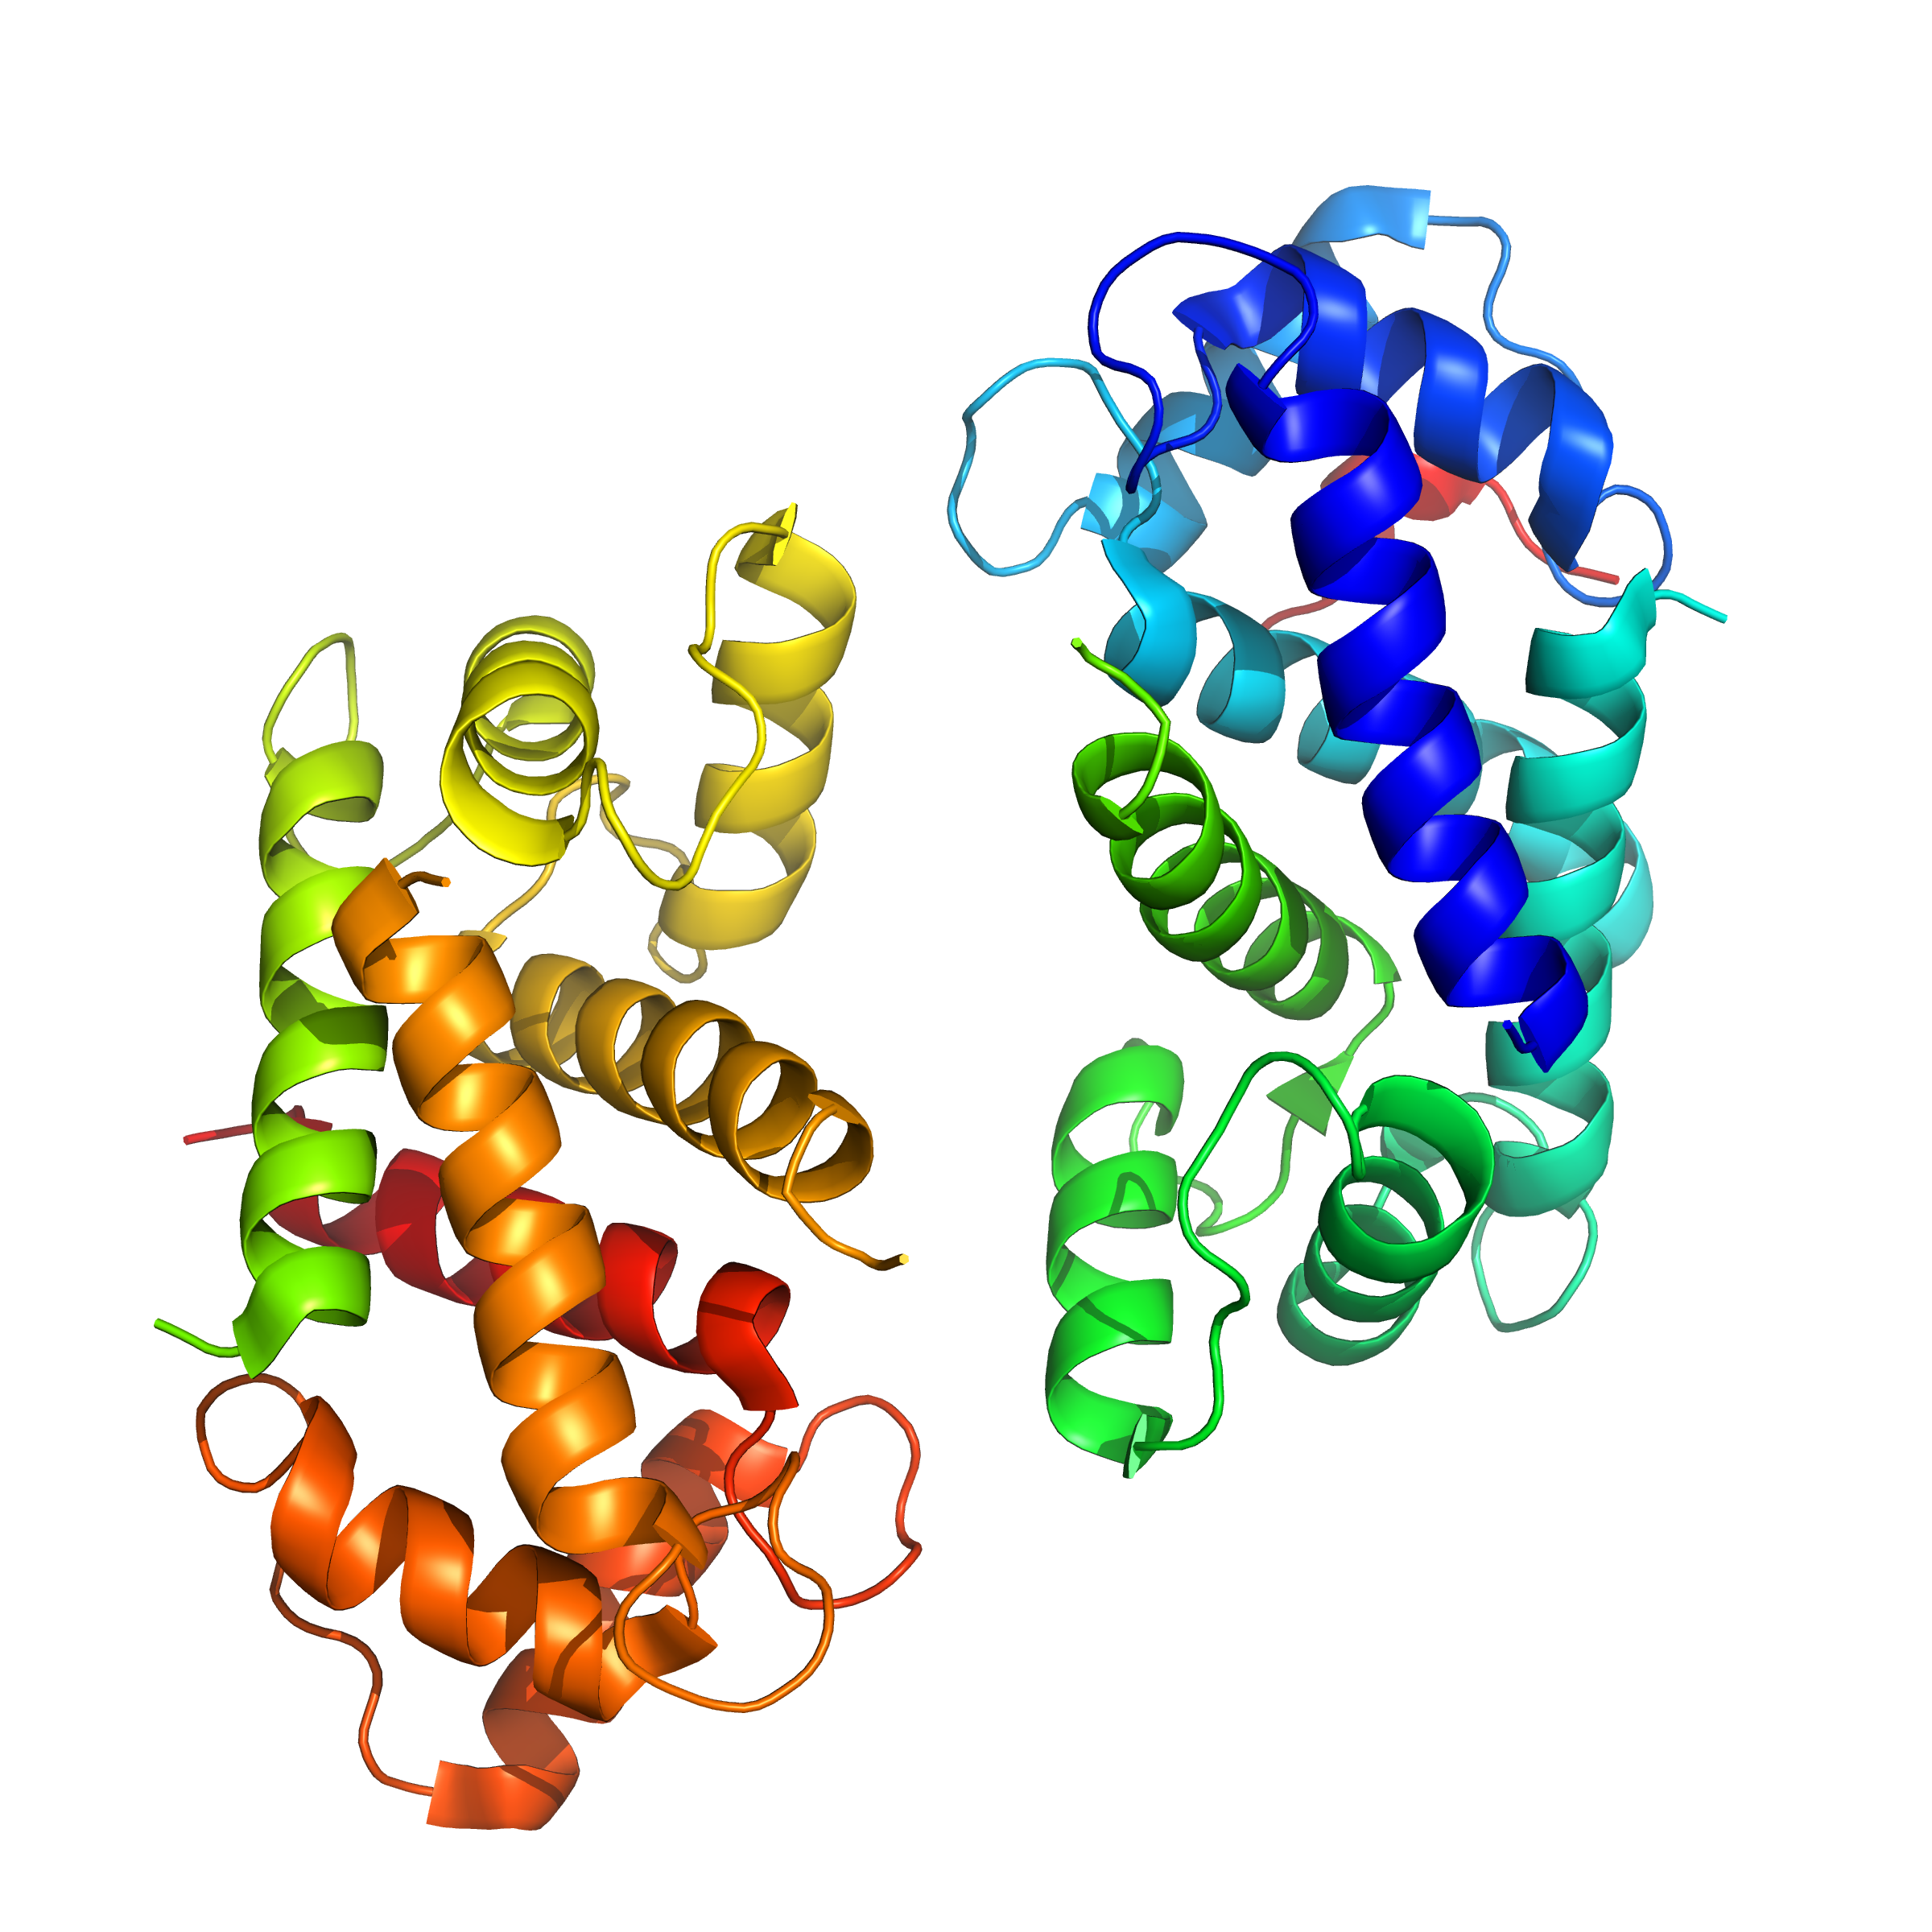 S100B | recombinant proteins offer